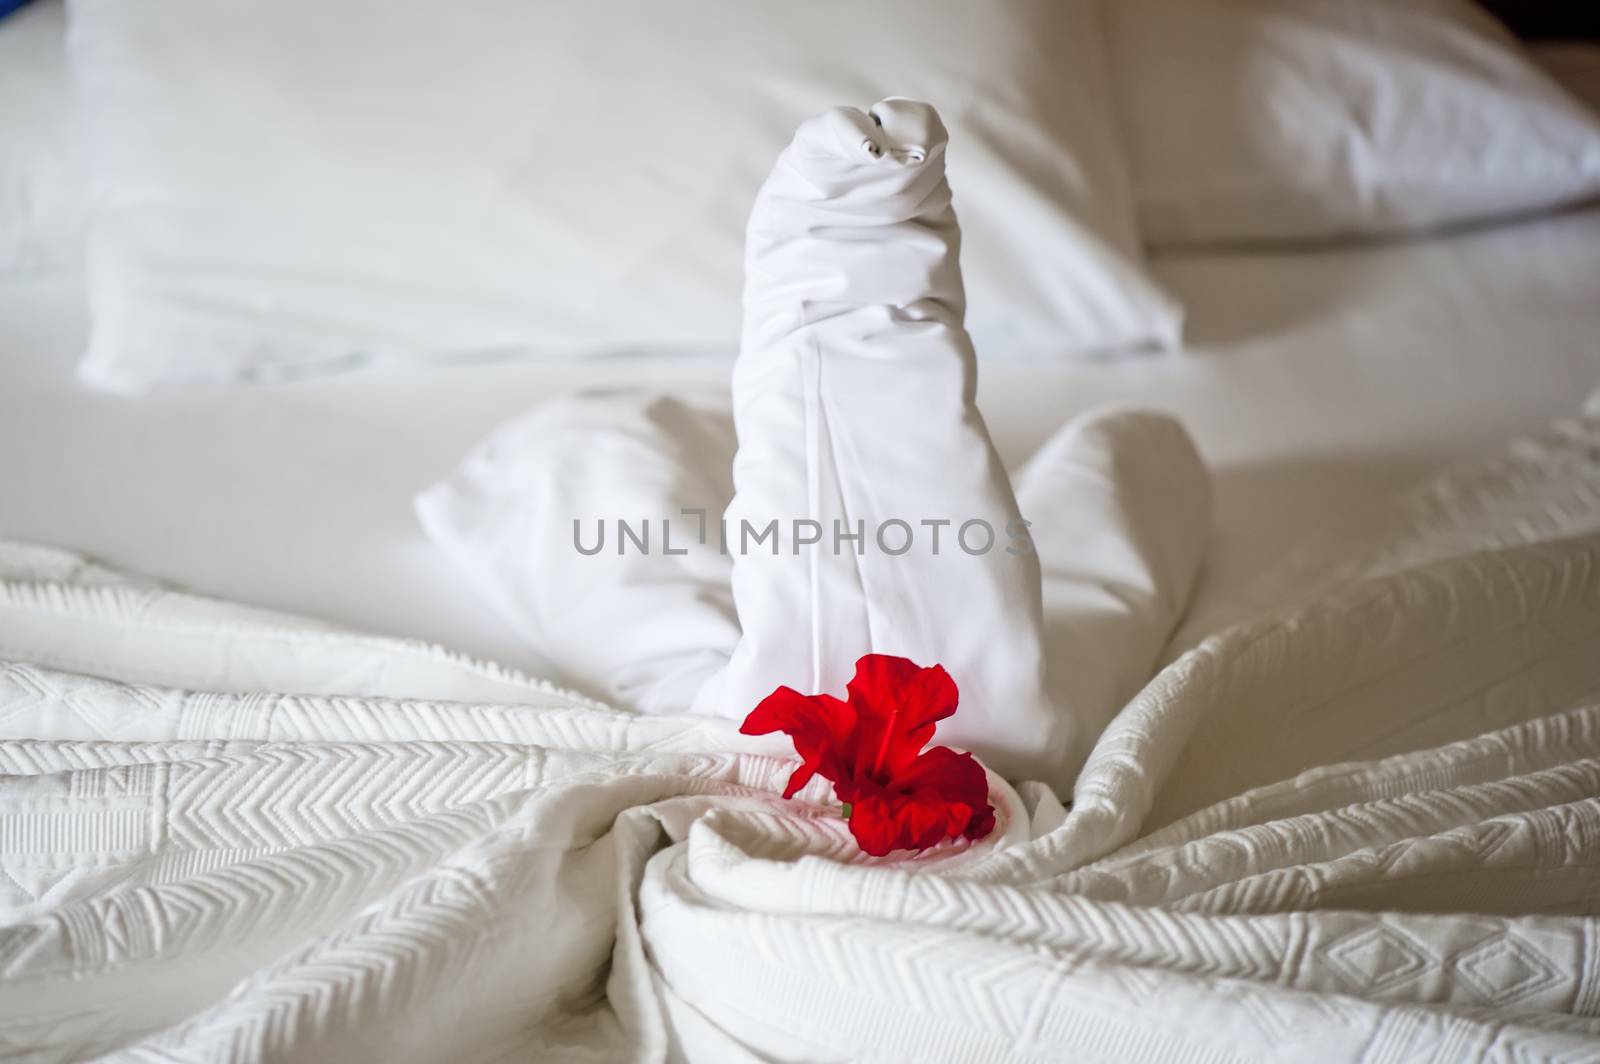 The composition of the swan on the bed linen by kosmsos111